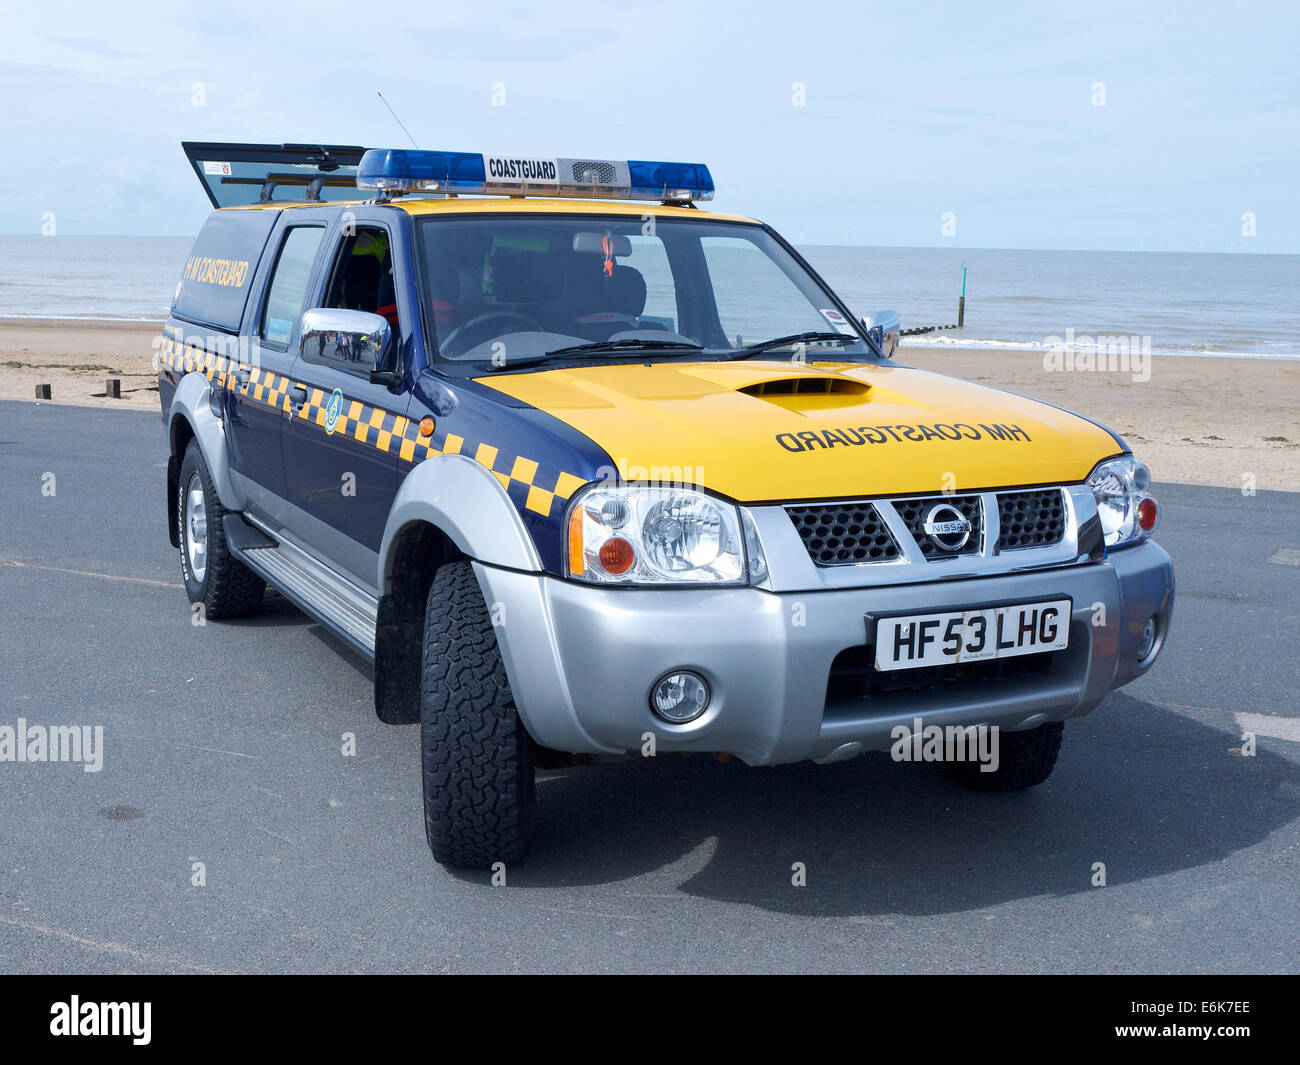 HM Coastguard search and rescue vehicle on the promenade in Rhyl Wales UK Stock Photo